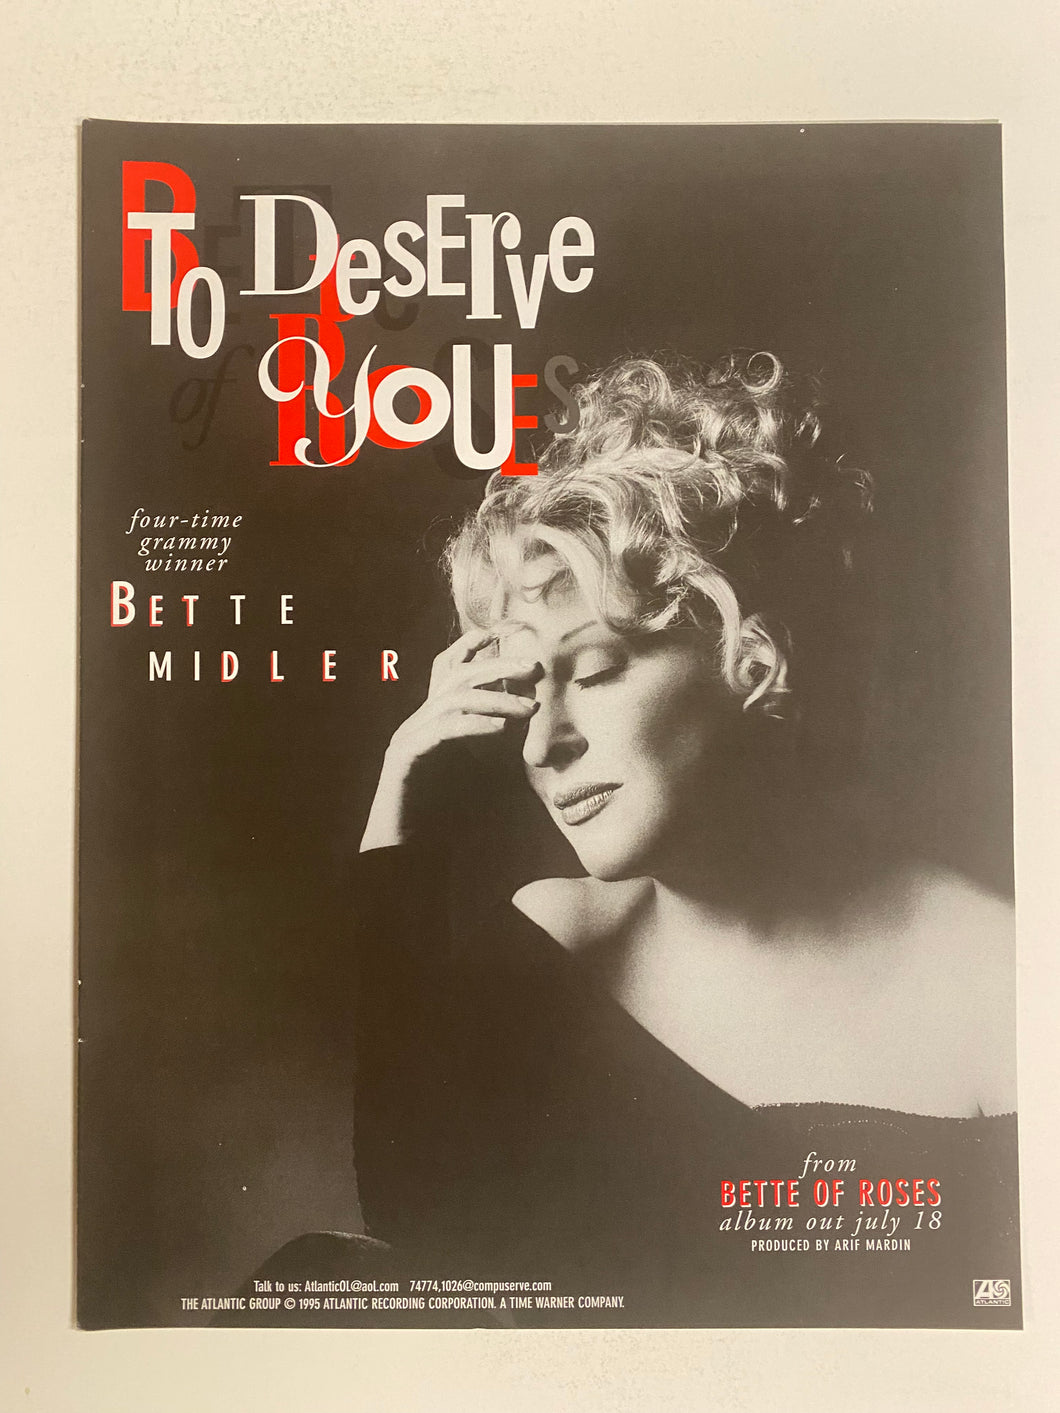 Bette Midler - 8 1/2” x 11” Trade Ad